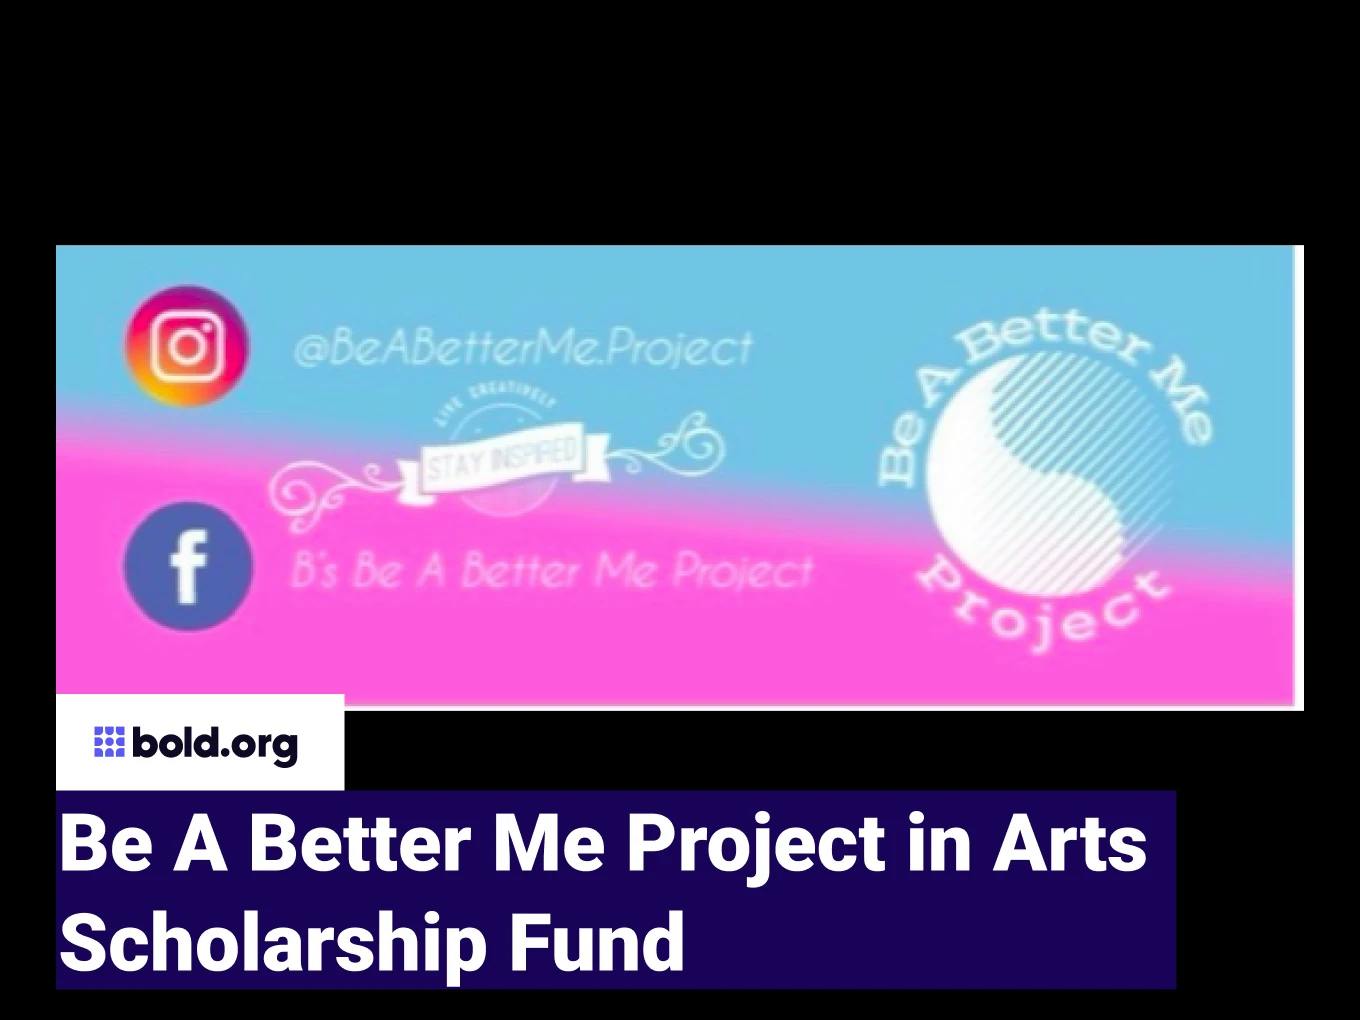 Be A Better Me Project in Arts Scholarship Fund